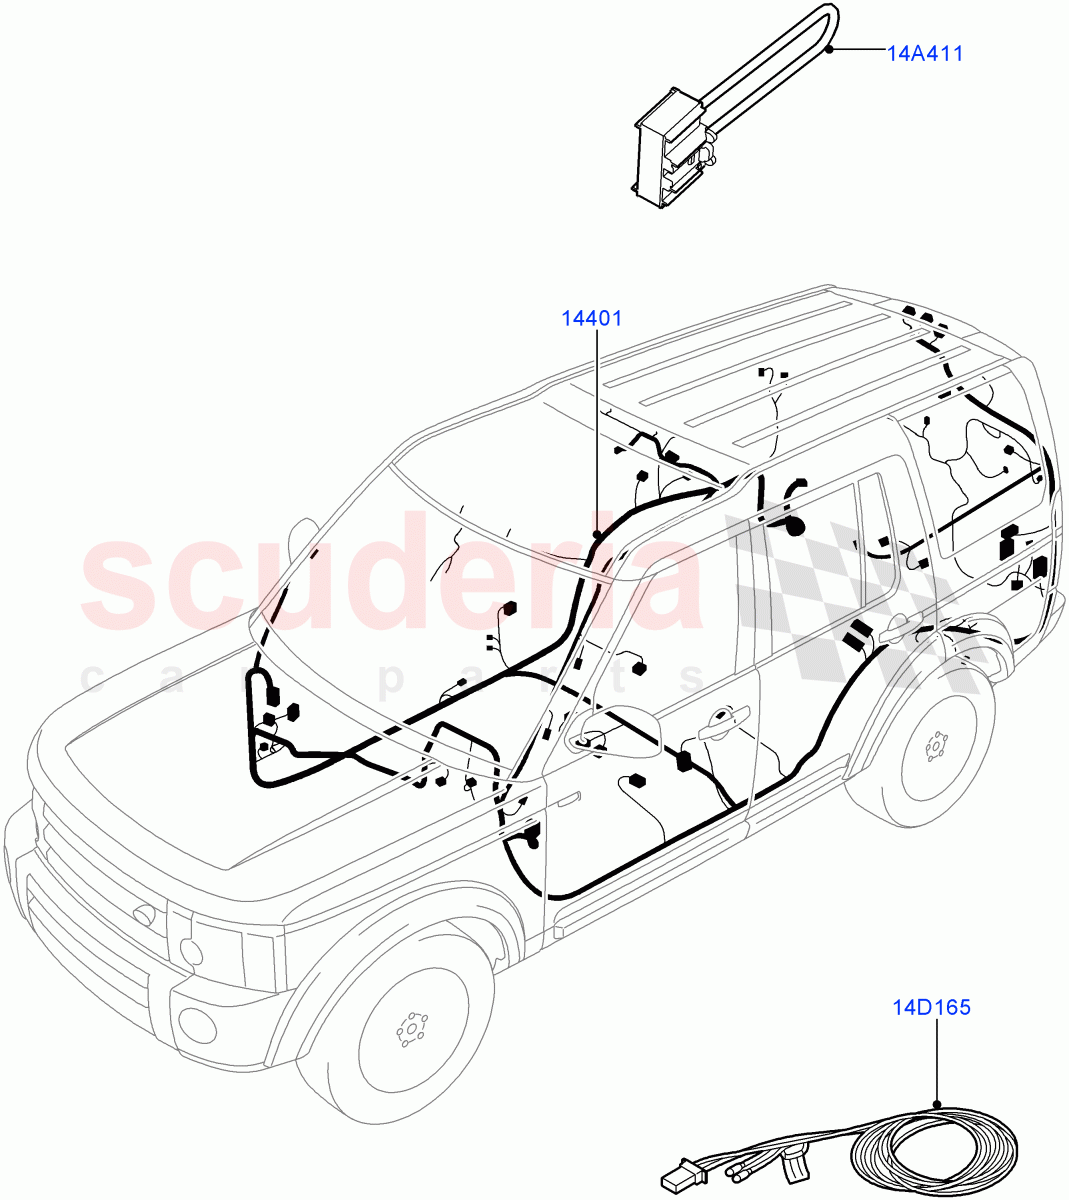 Electrical Wiring - Engine And Dash(Main Harness)((V)FROMAA000001,(V)TOAA999999) of Land Rover Land Rover Discovery 4 (2010-2016) [5.0 OHC SGDI NA V8 Petrol]